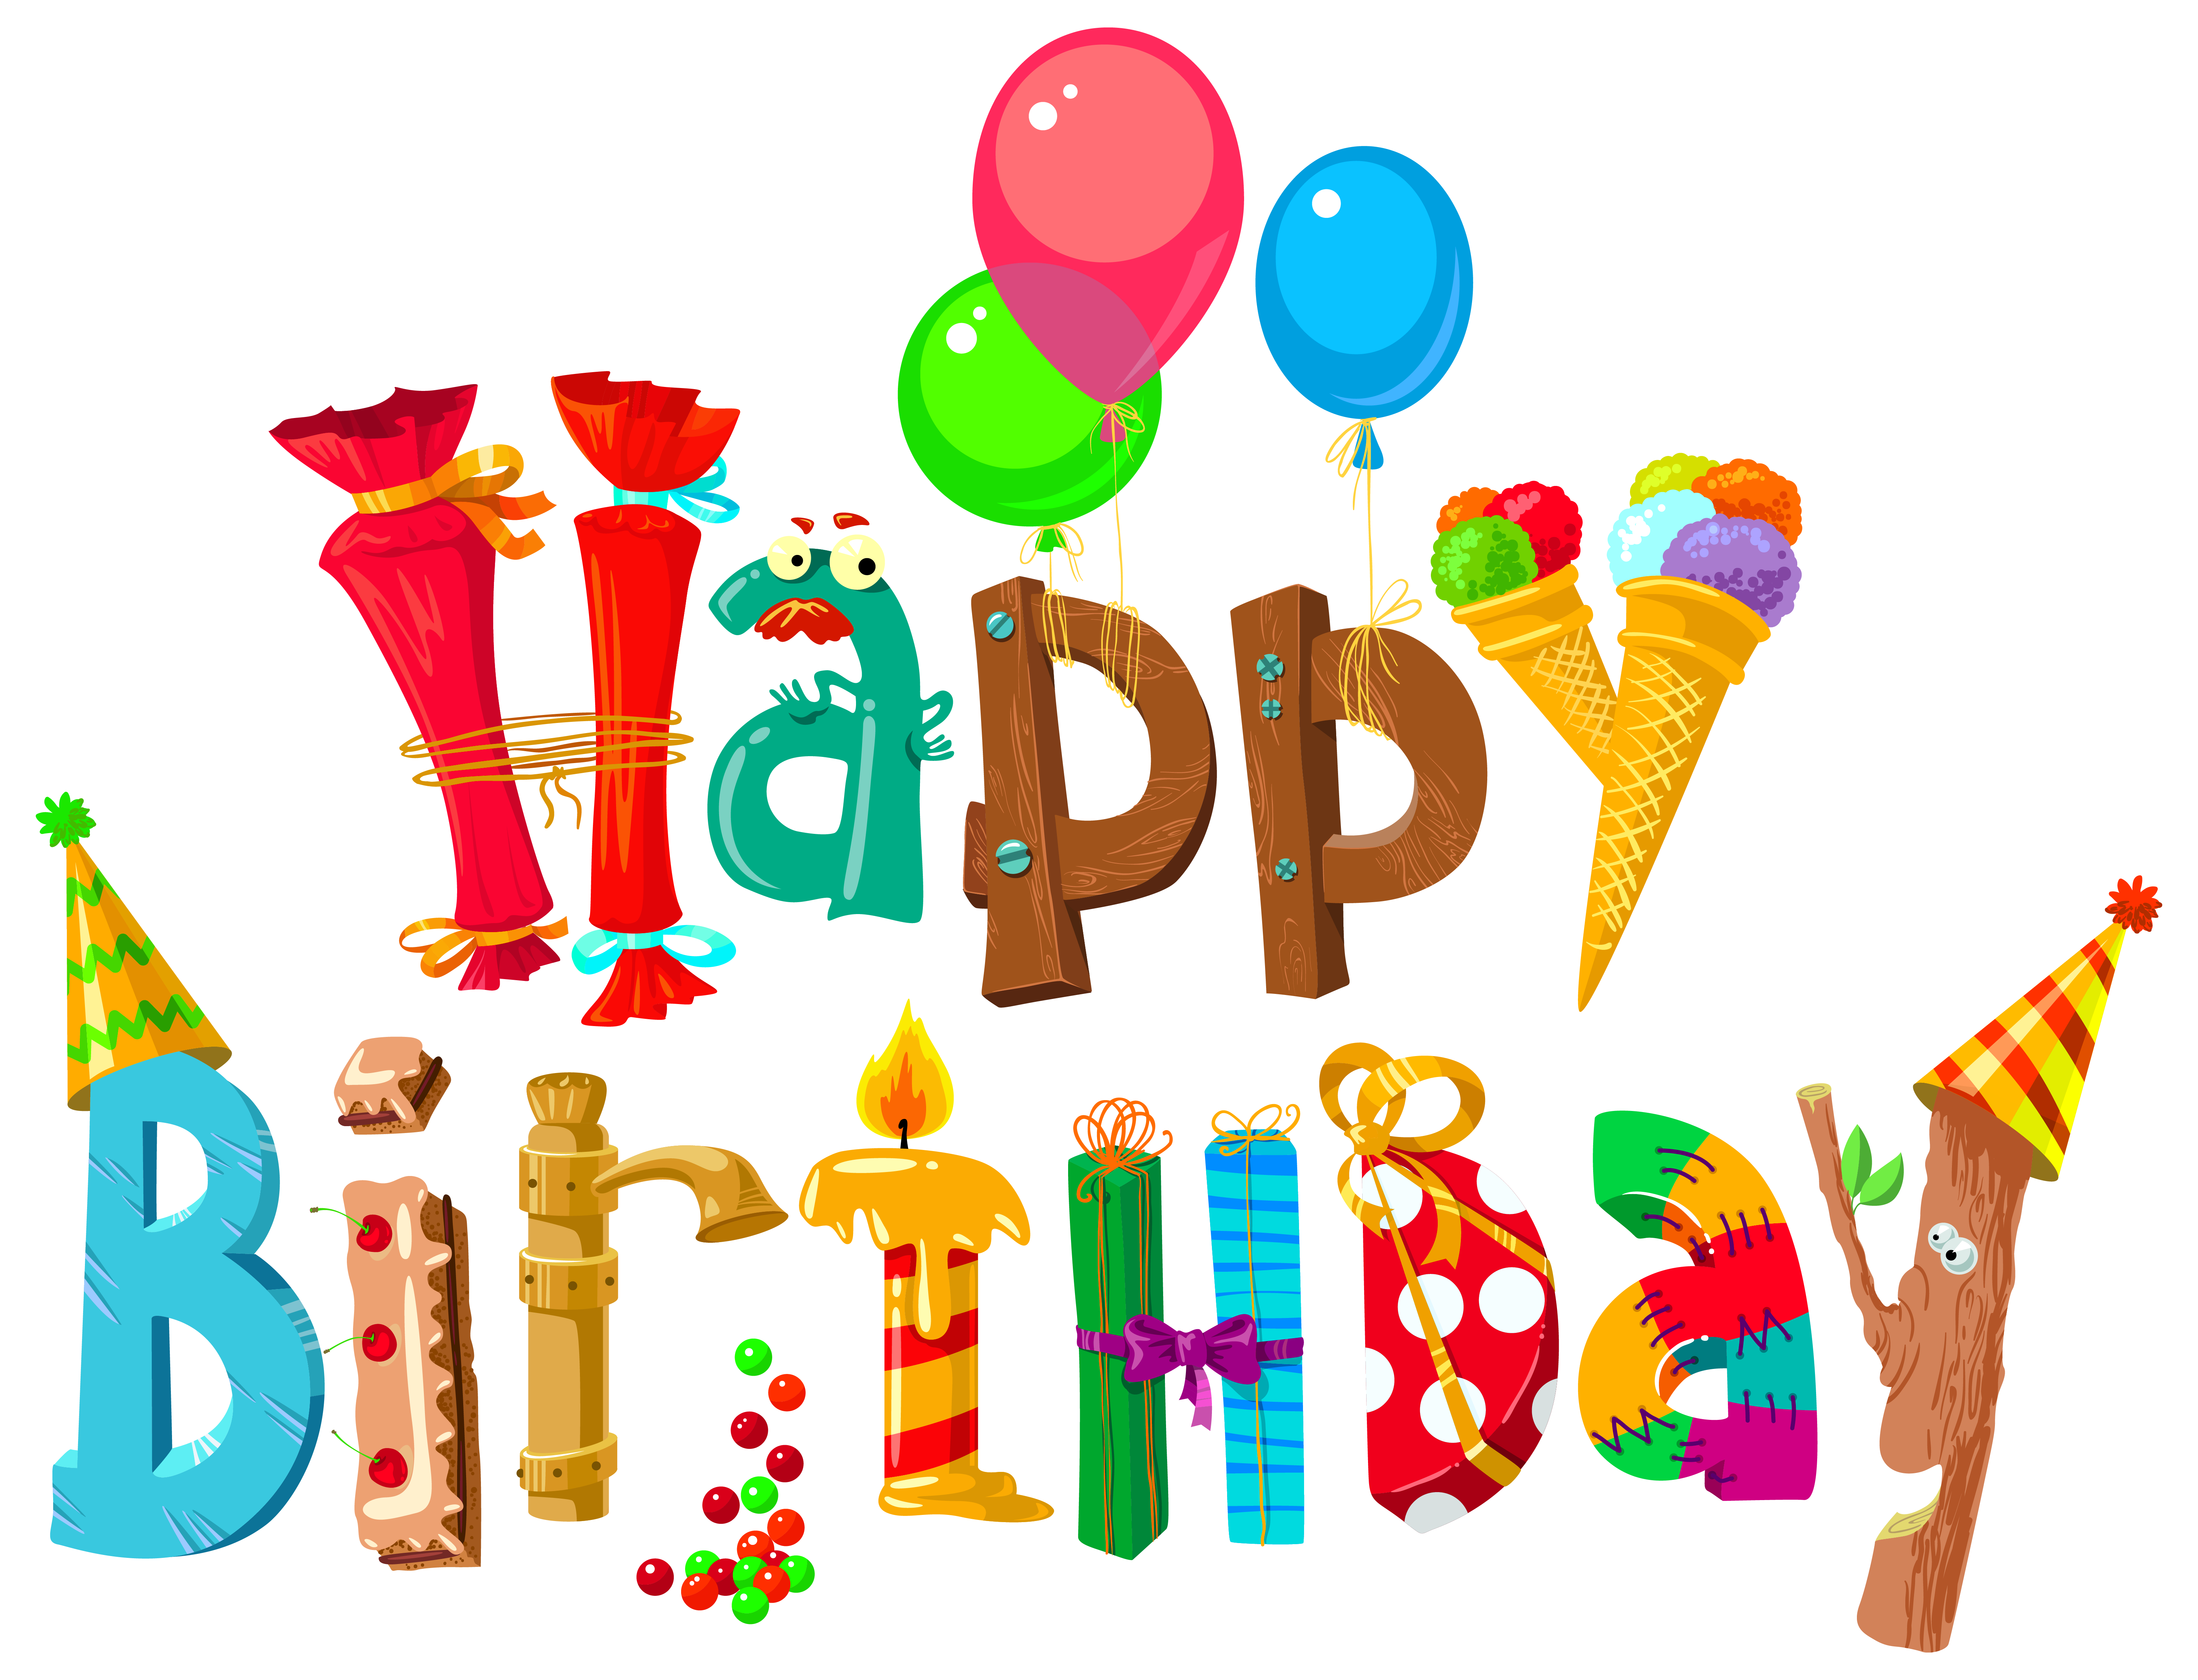 Dot clipart quote. Funny happy birthday image